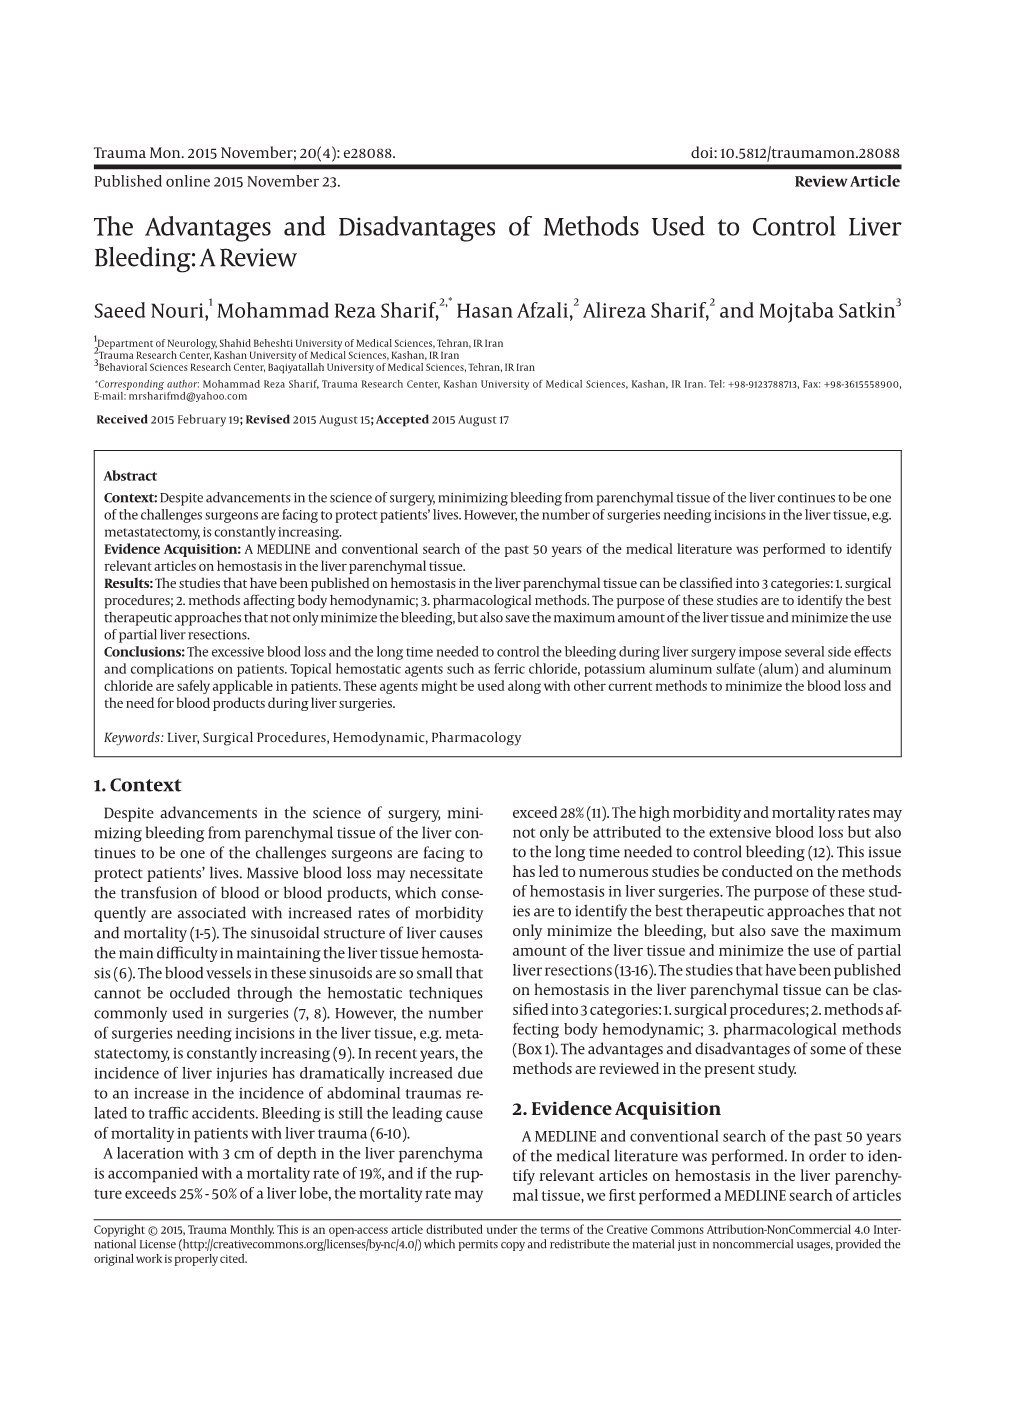 The Advantages and Disadvantages of Methods Used to Control Liver Bleeding: a Review